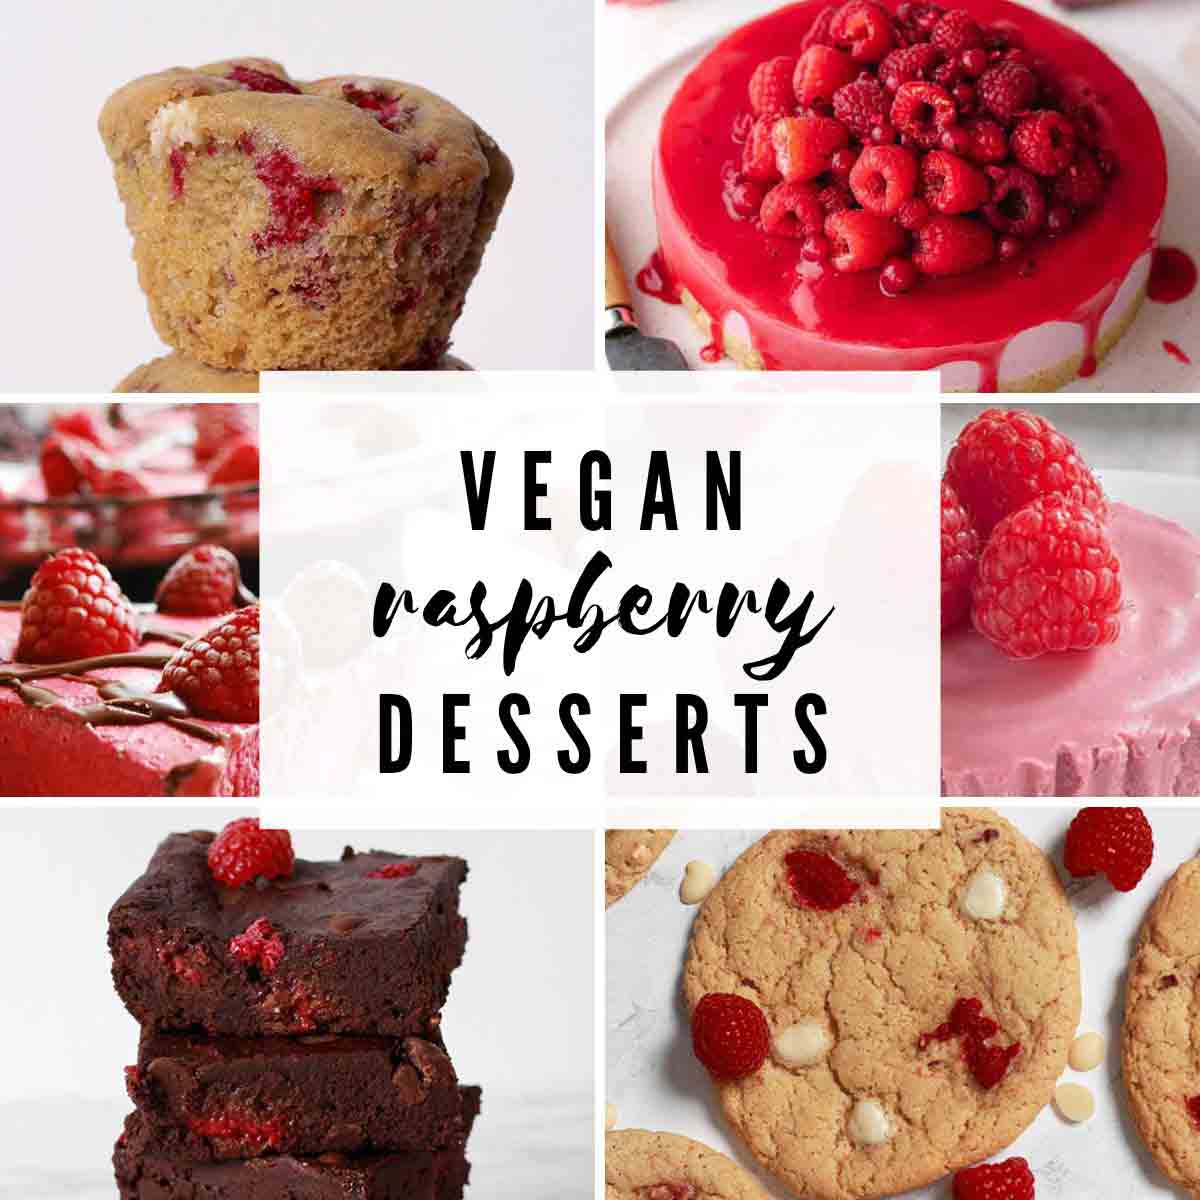 Vegan Raspberry Desserts Images With Text Overlay